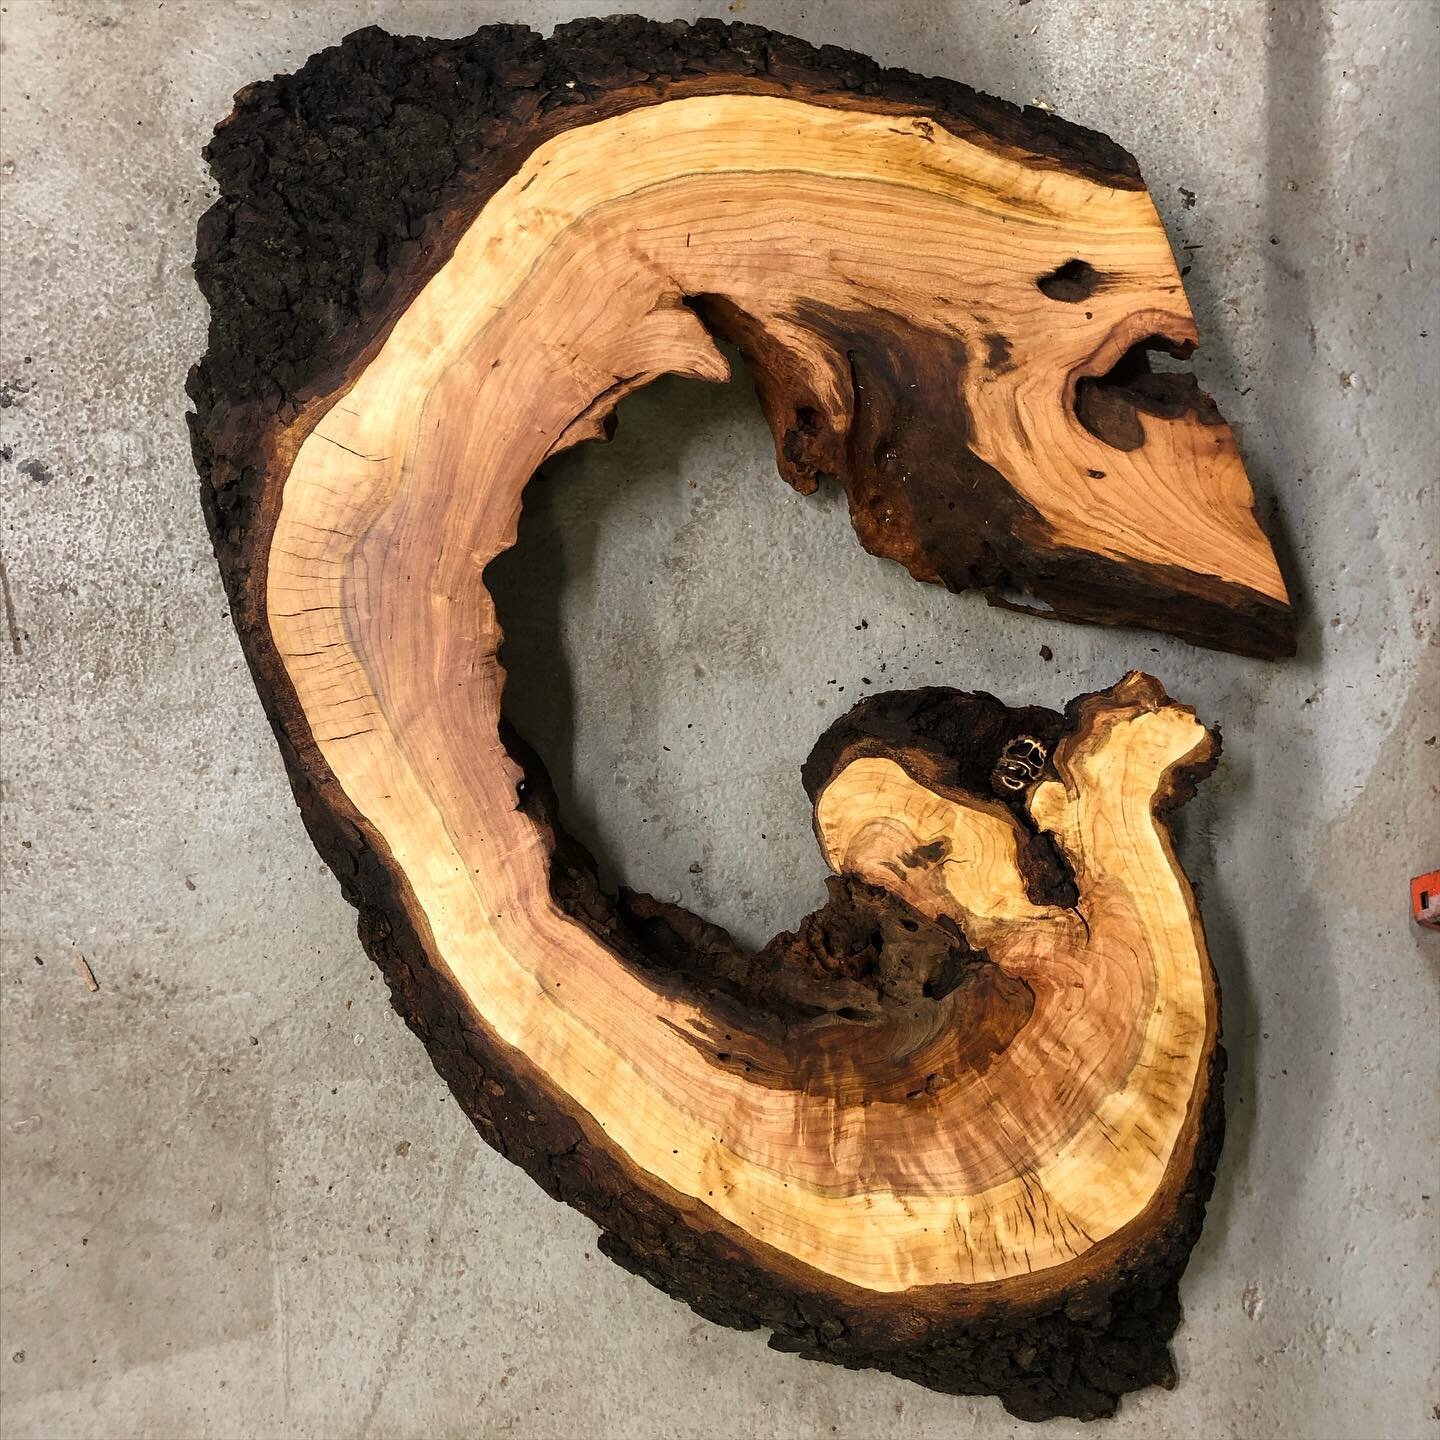 What do you C? What do you G? #growth #tree #wood #naturaledge #liveedge #furniture #art #design #woodworking #cherry #cherrywood #michigan #weirdwood #wildwood #oneofakind